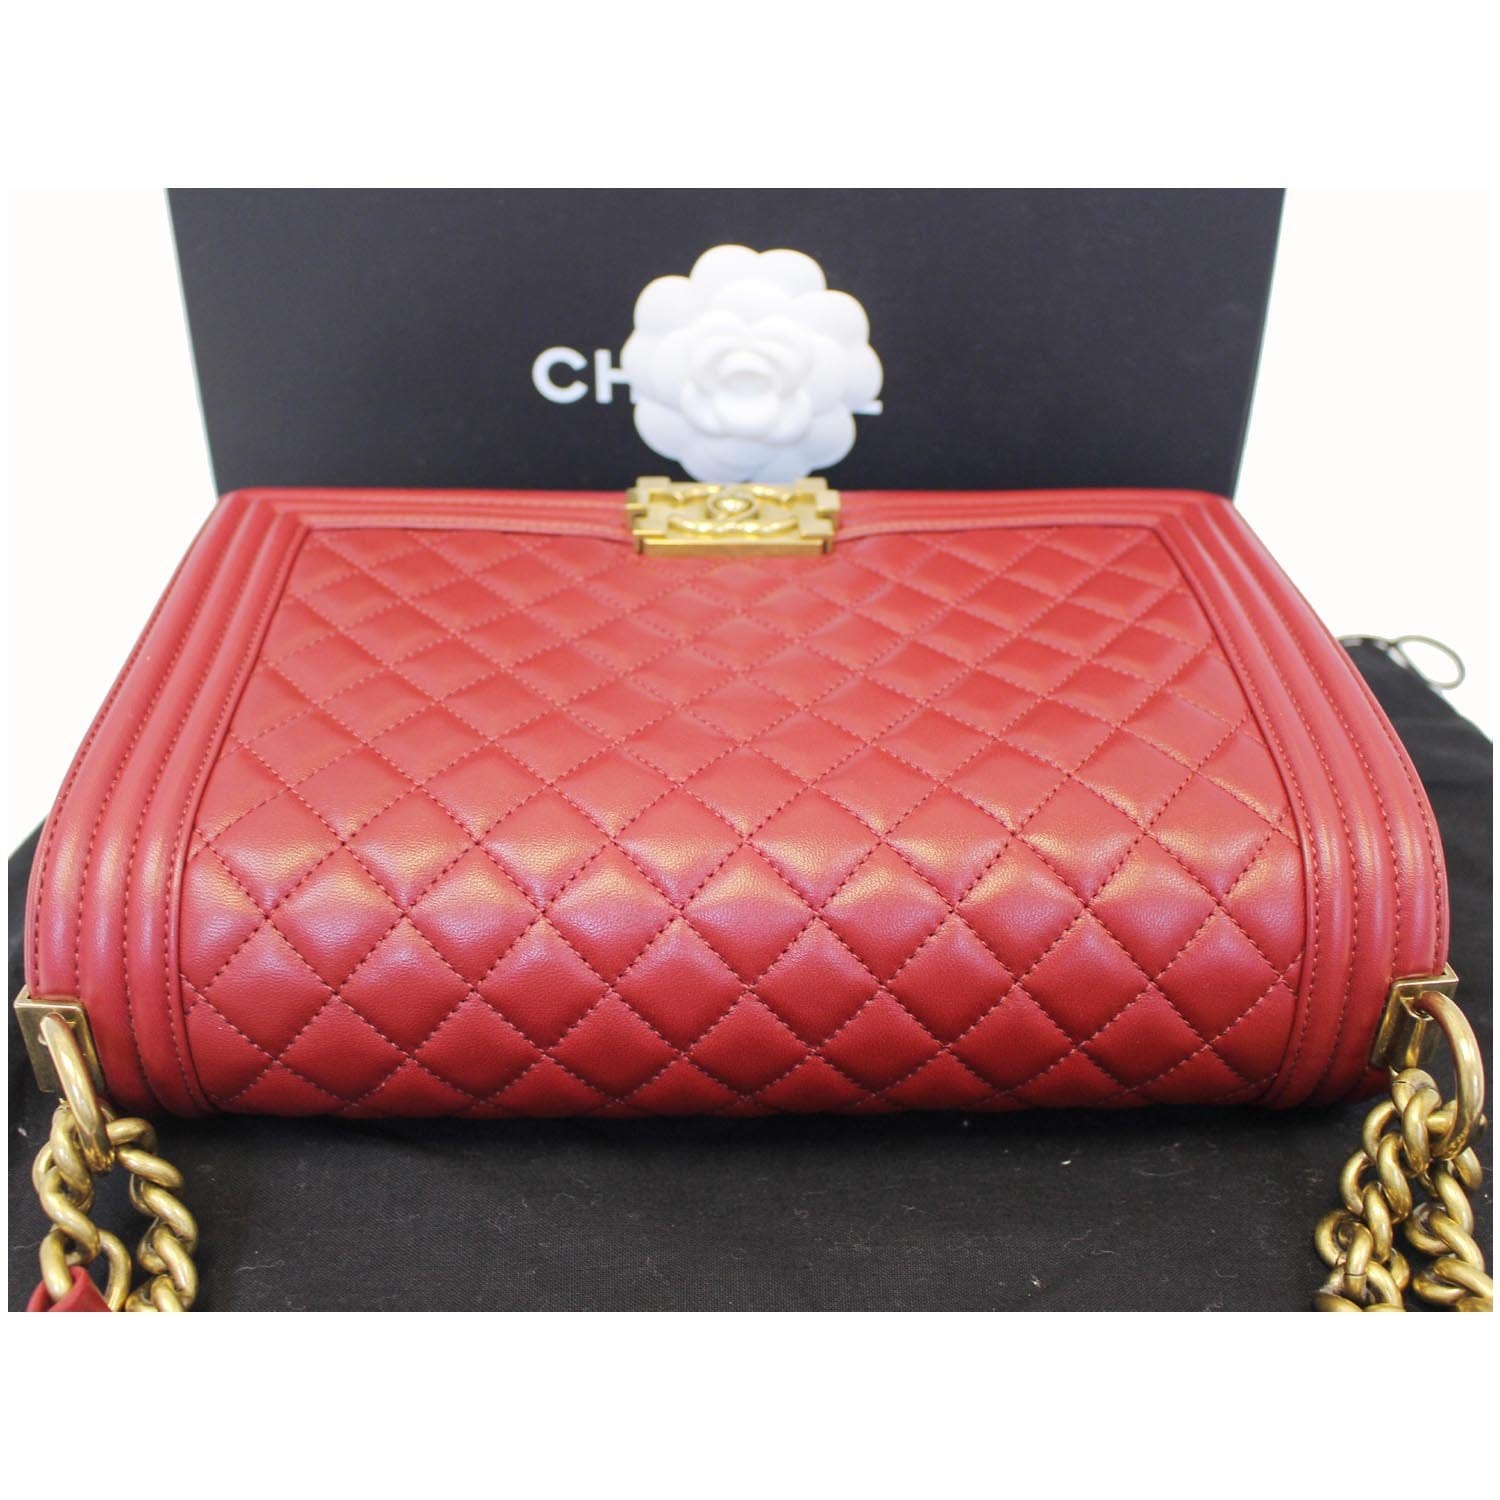 CHANEL CHANEL Matelasse W Flap Chain Shoulder Bag SHW Caviar leather Red  Used Women